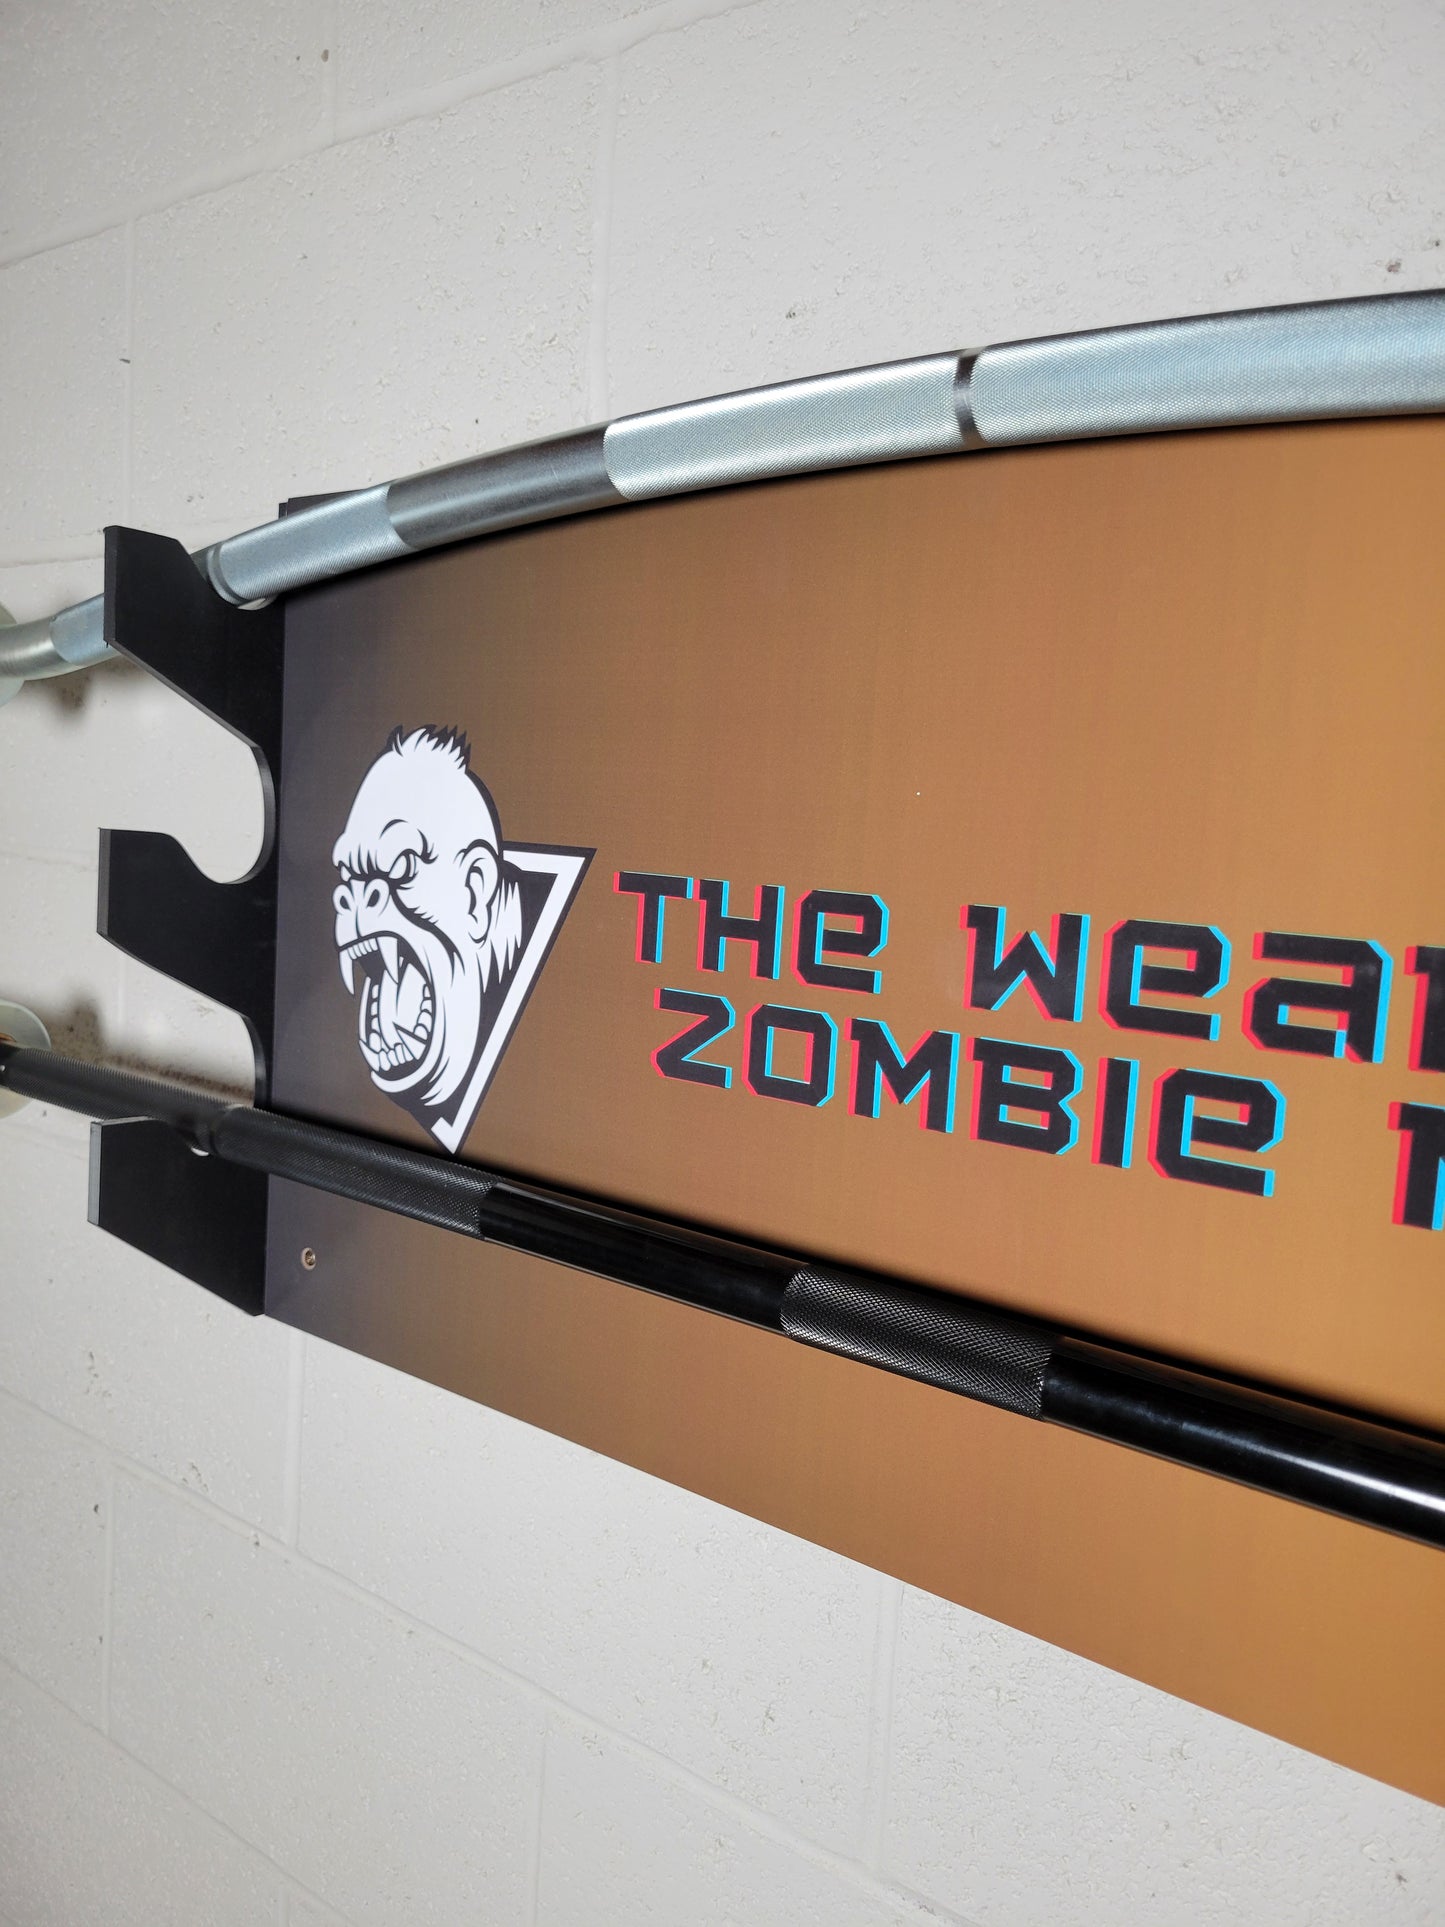 The Weak Are Zombie Meat Rack